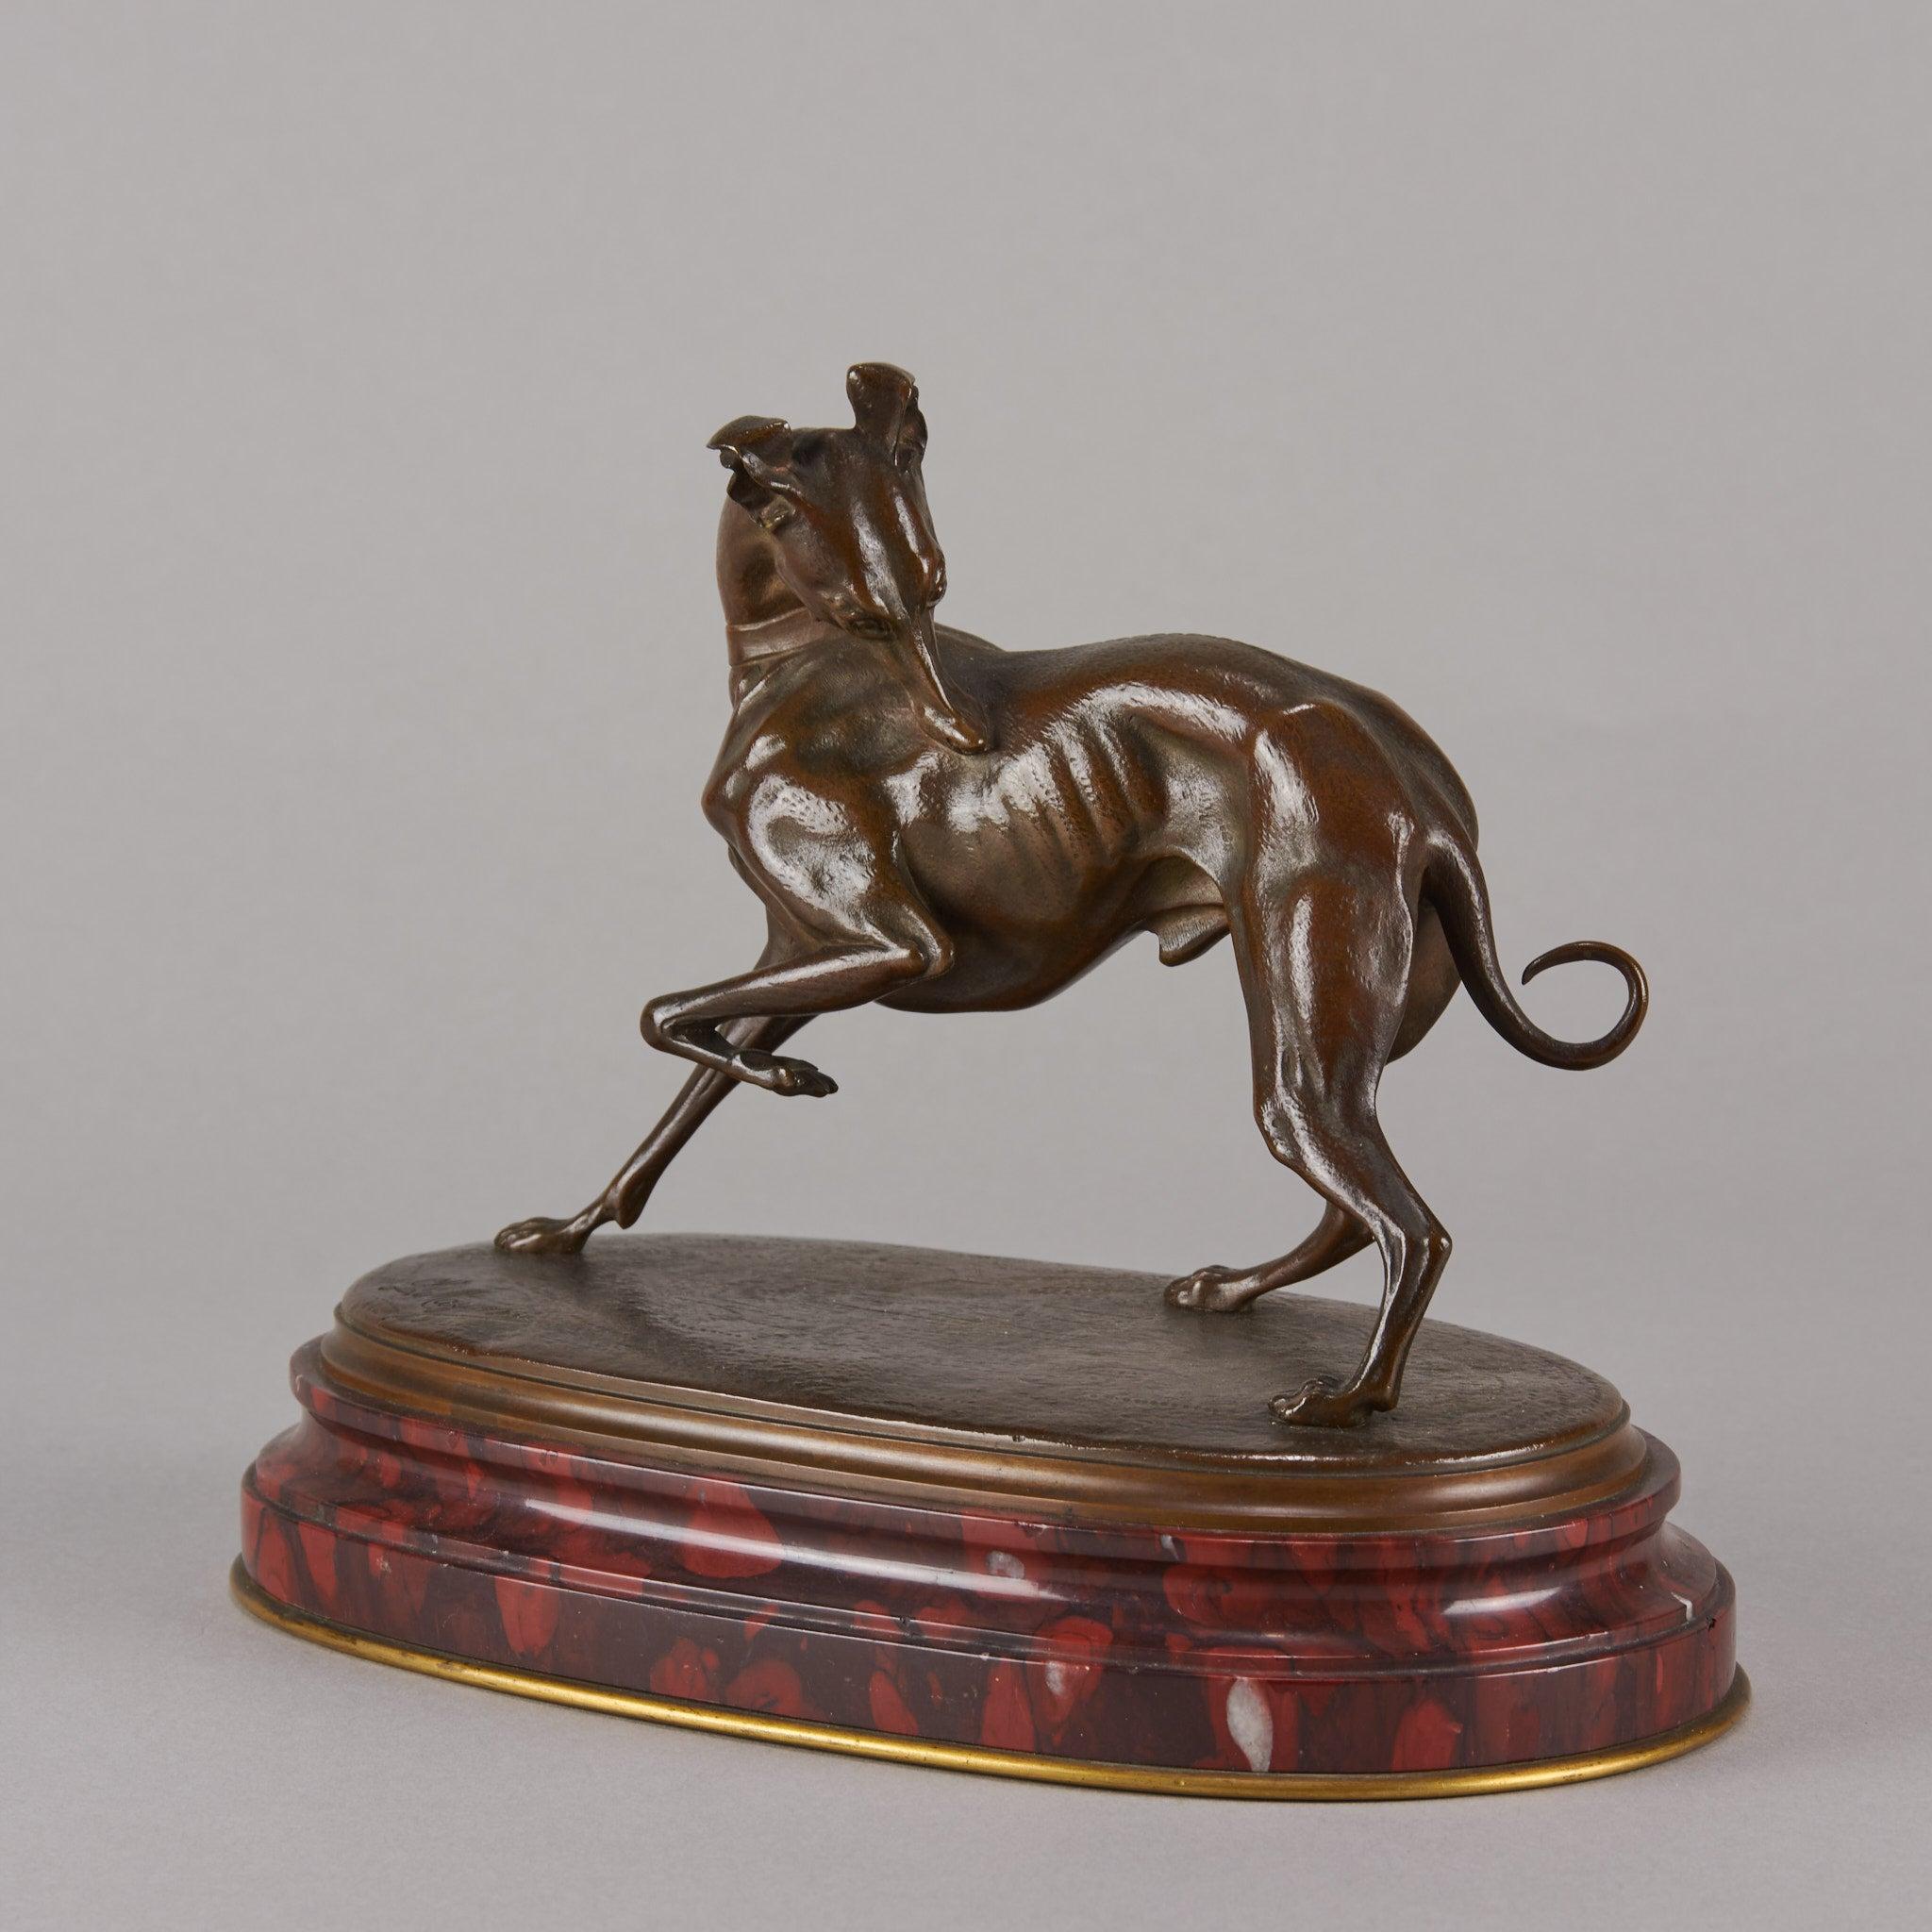 Delightful late19th century French Animaliers bronze study of a turning whippet looking around in an attitude to play, with rich brown colour and fine hand chased surface detail. Signed L Mayer and raised on an oval rouge griotte marble